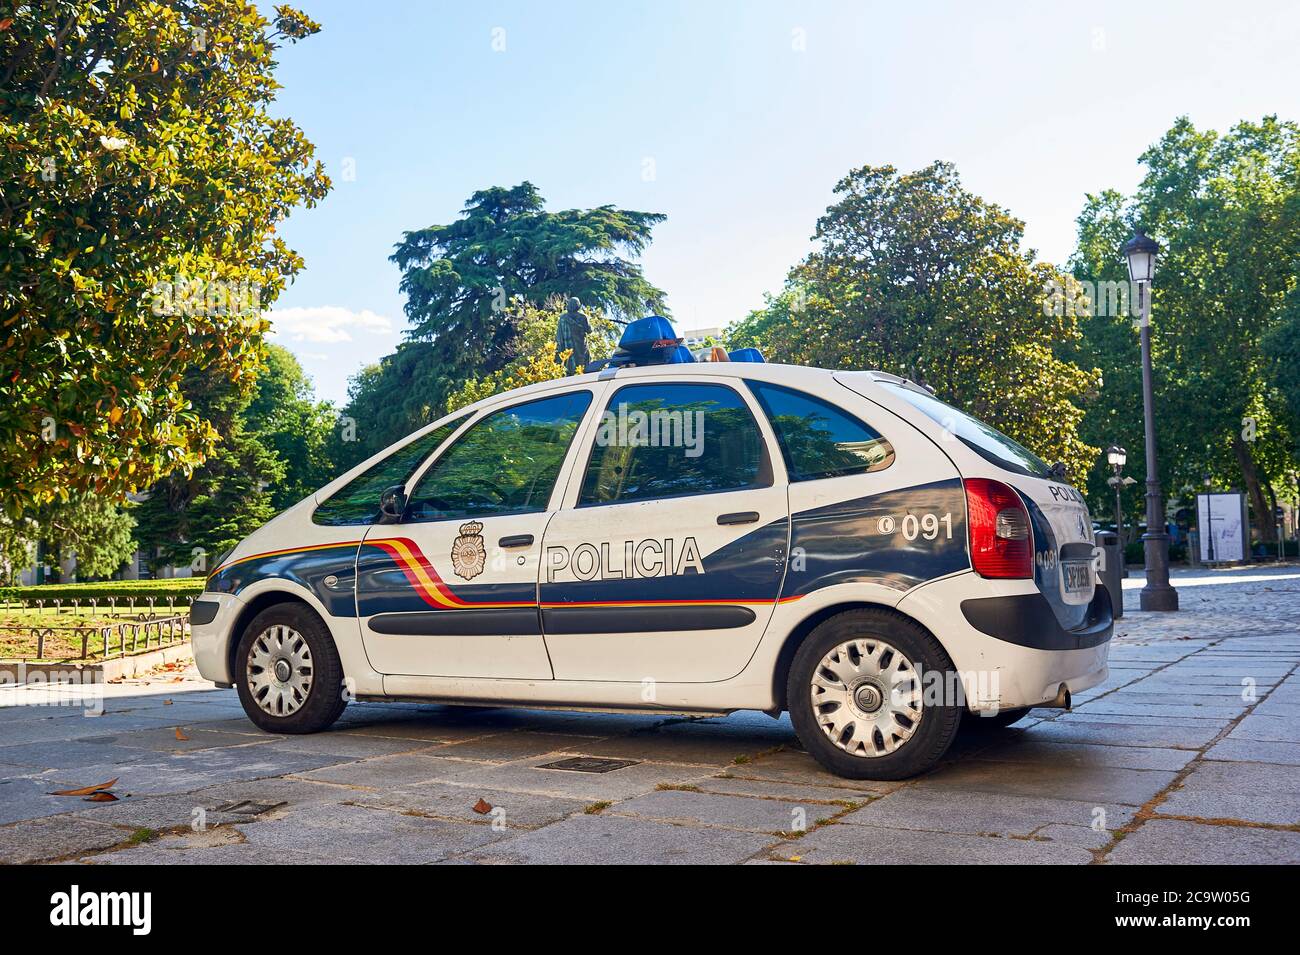 Madrid, Spain - June 6, 2020: Spanish police car on a spring afternoon parked outside the Prado Museum in Madrid. Stock Photo